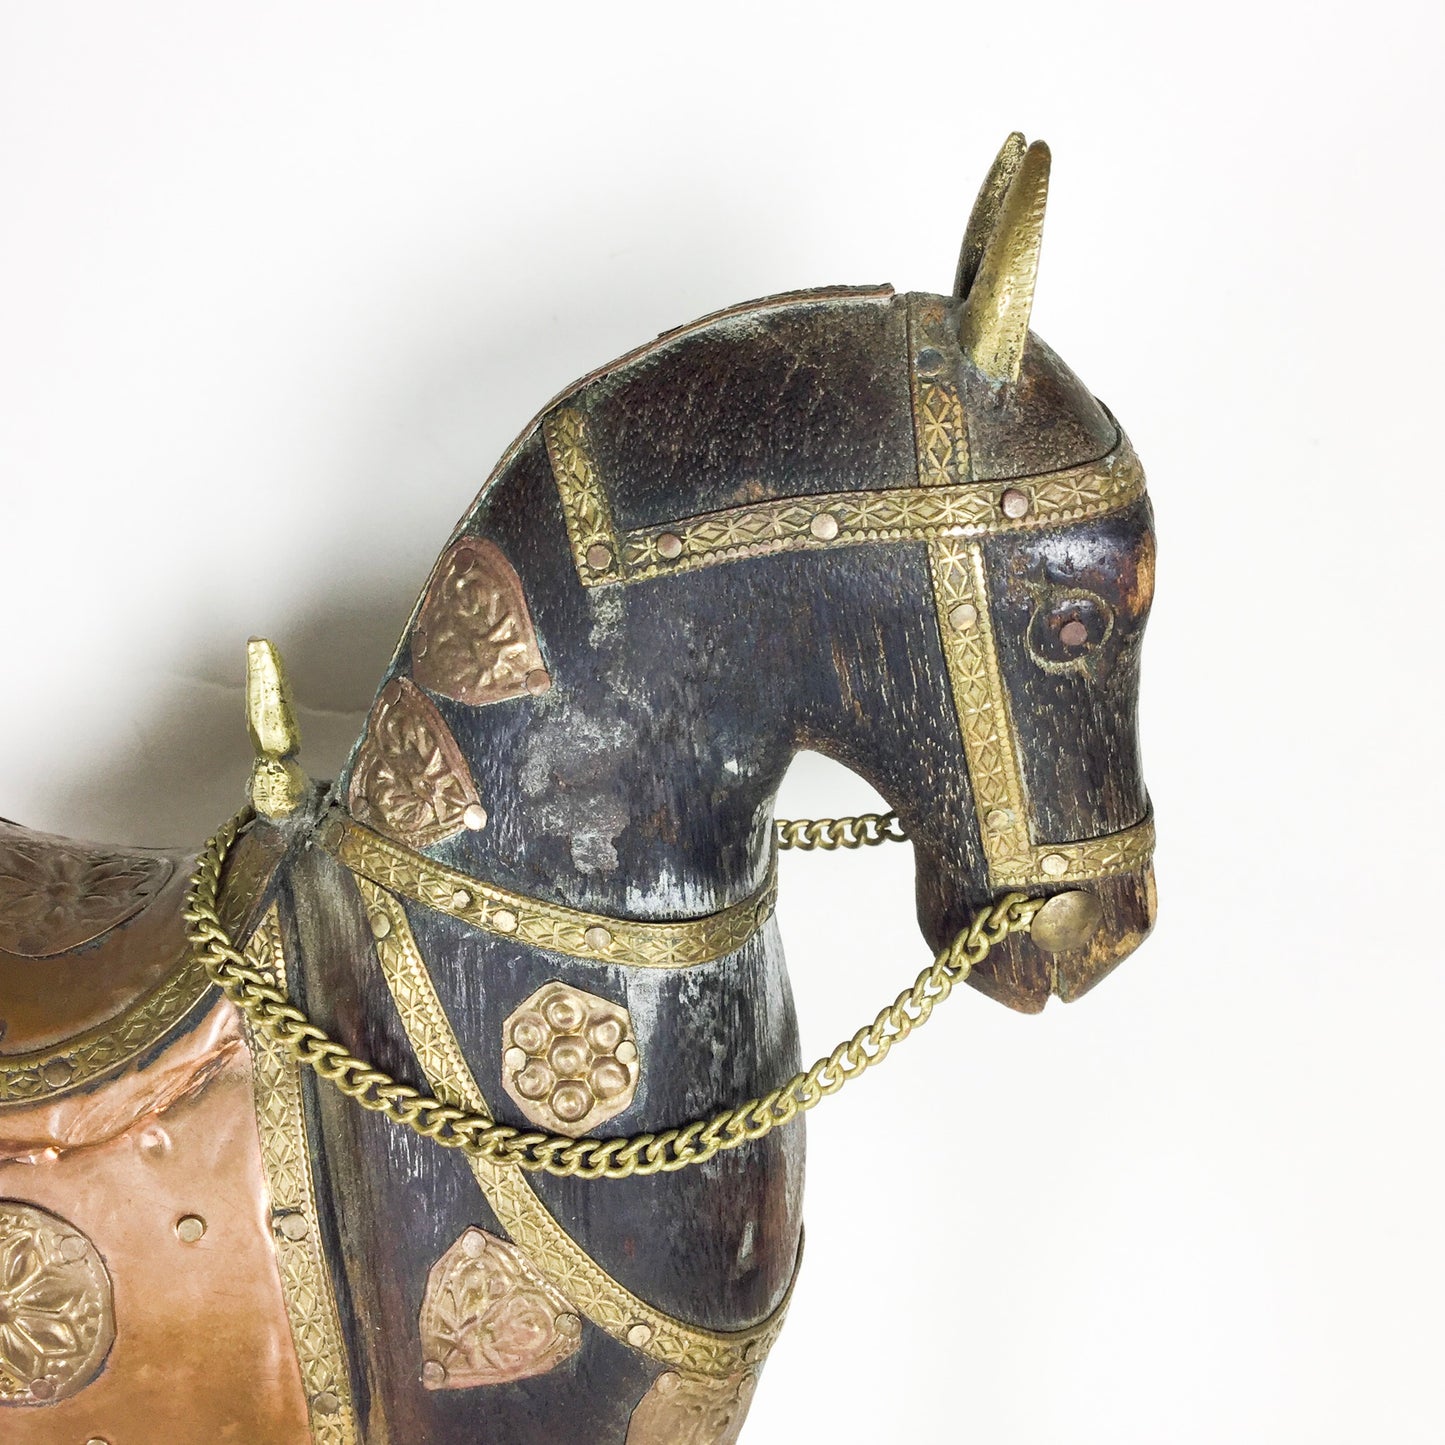 Vintage Wood and Metal Horse with brass and copper